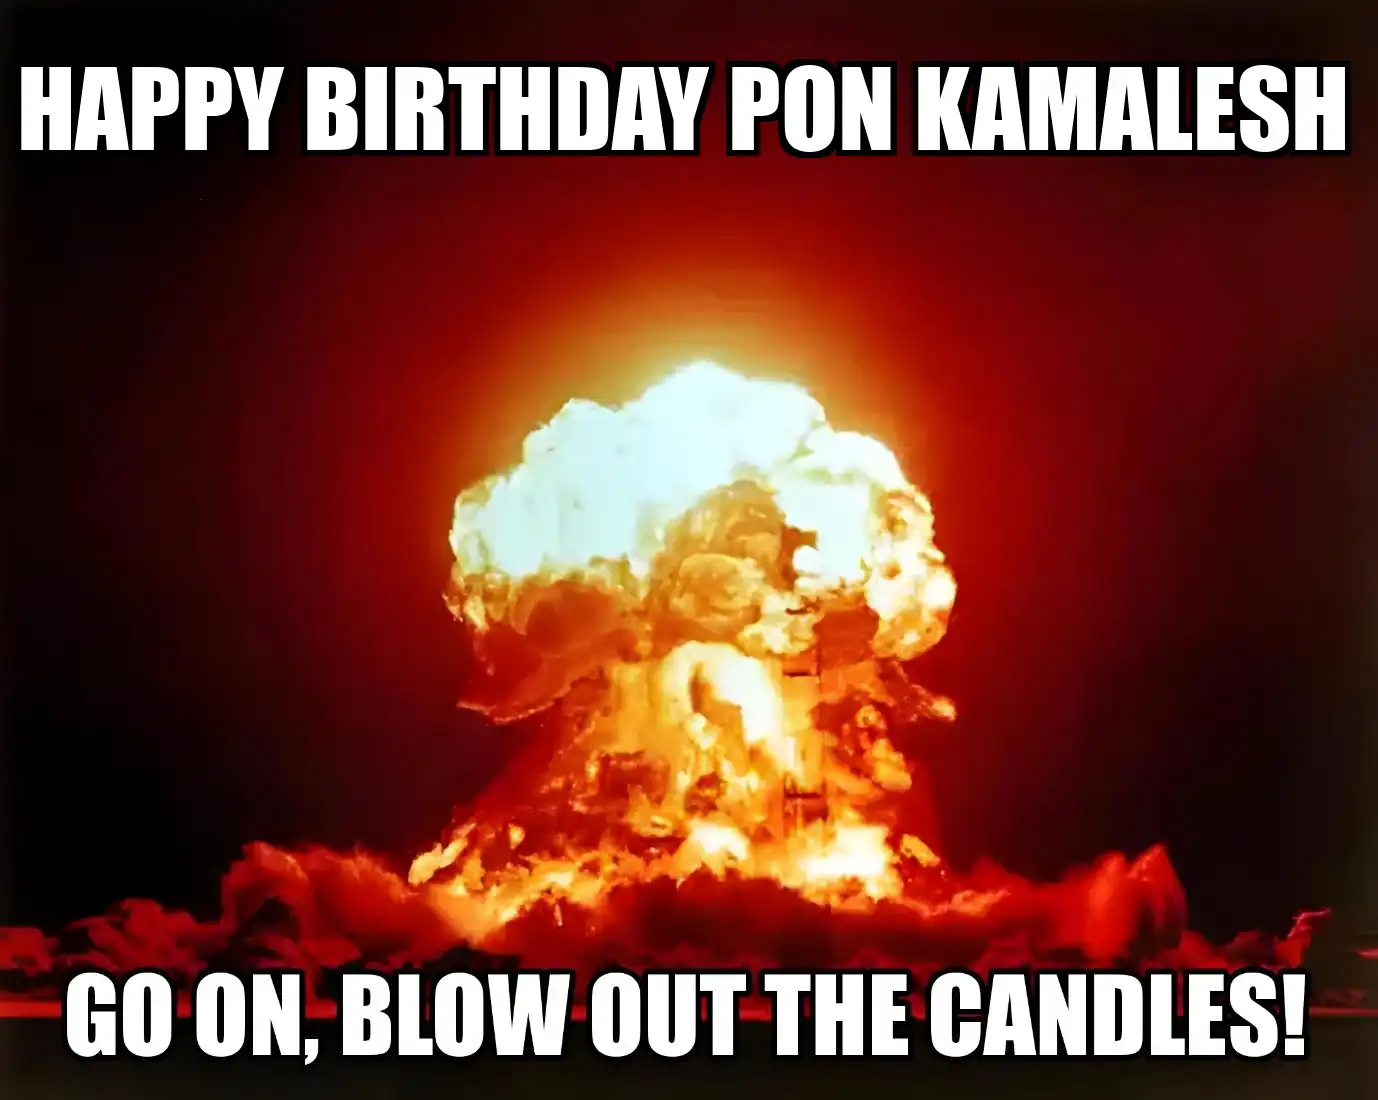 Happy Birthday Pon kamalesh Go On Blow Out The Candles Meme